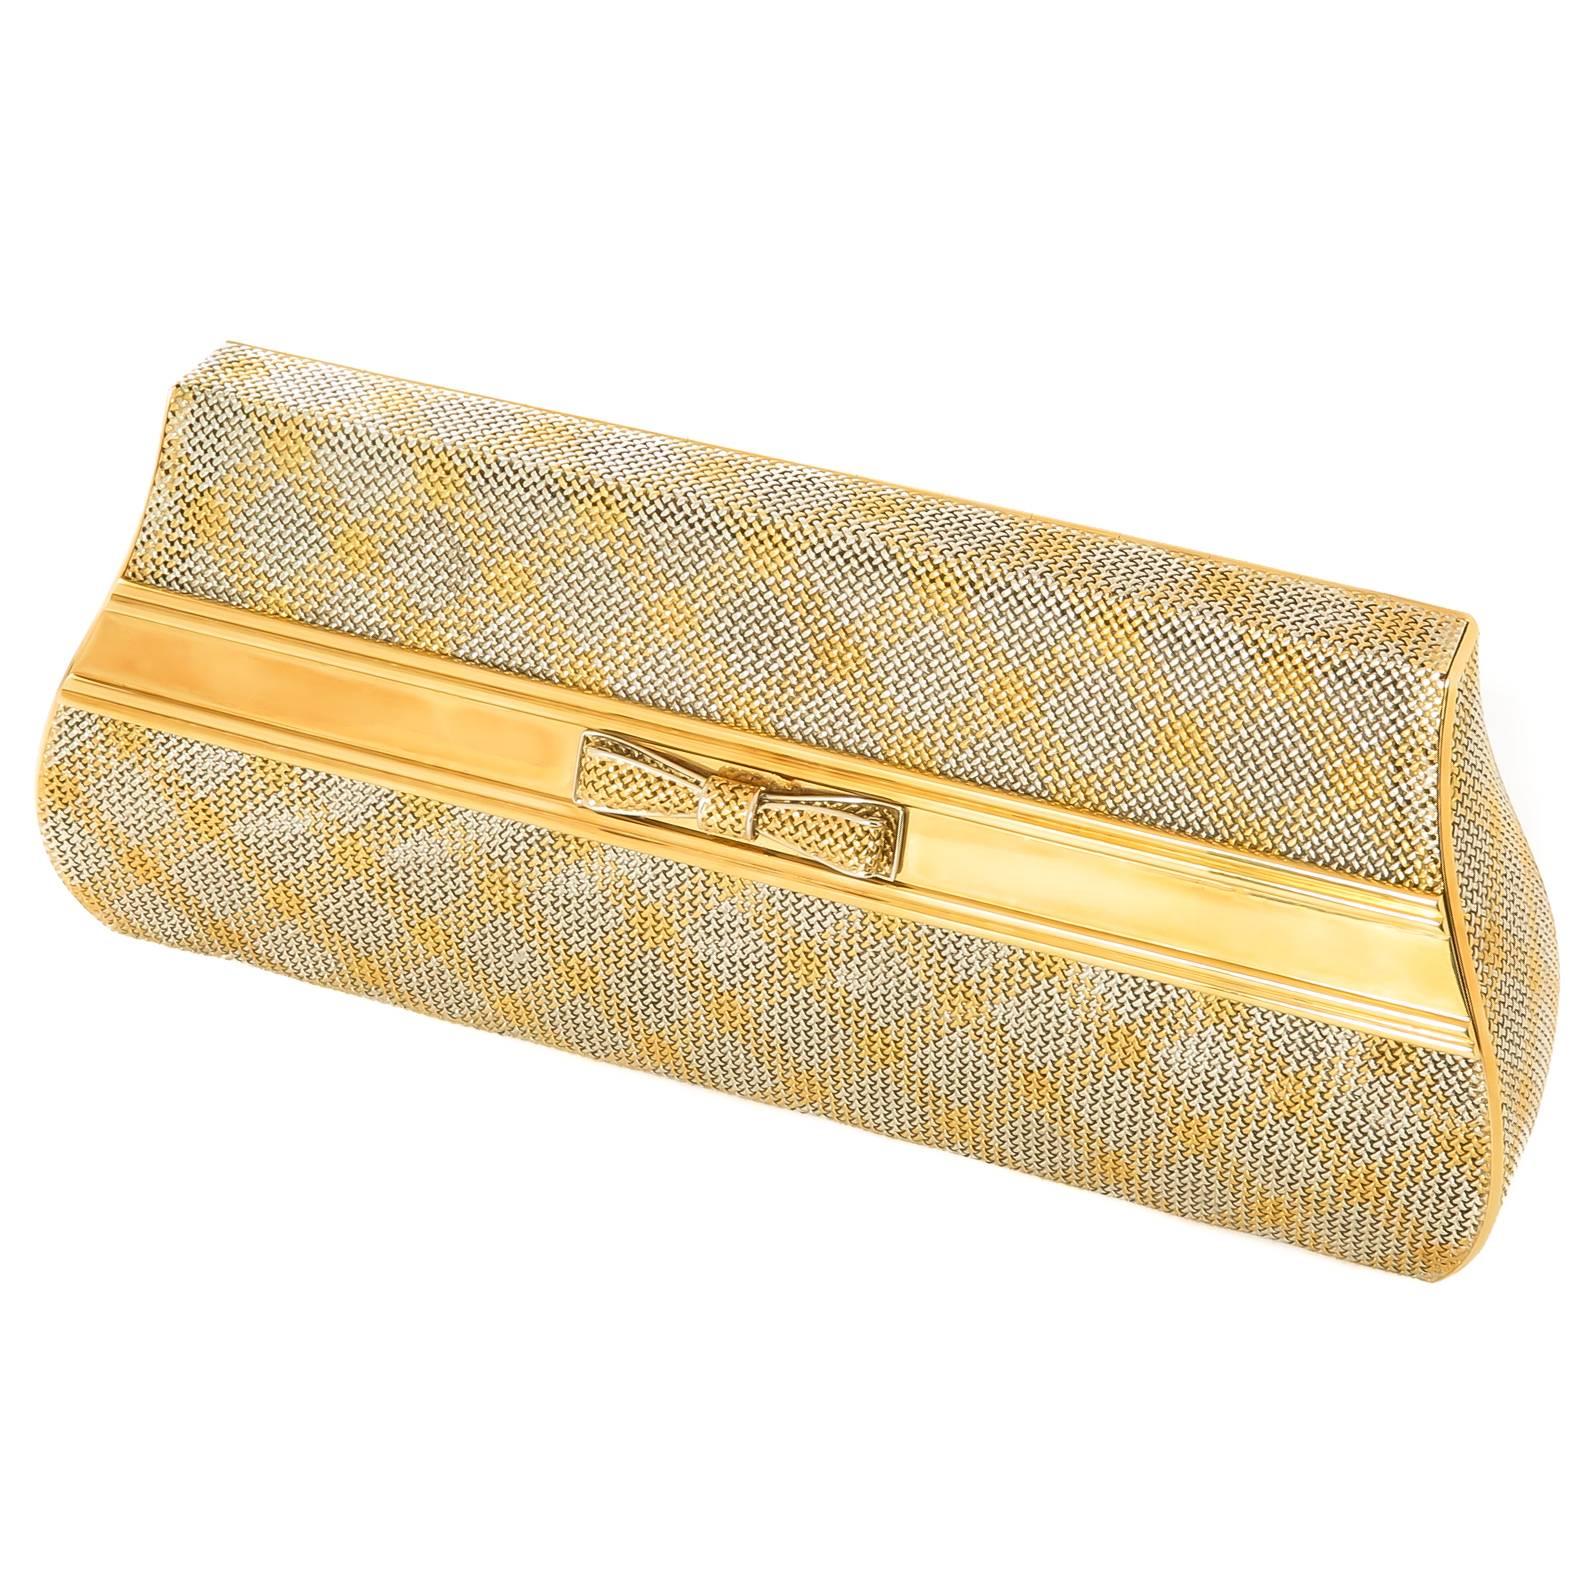 1980s Bulgari Two Color Gold Evening Clutch Bag